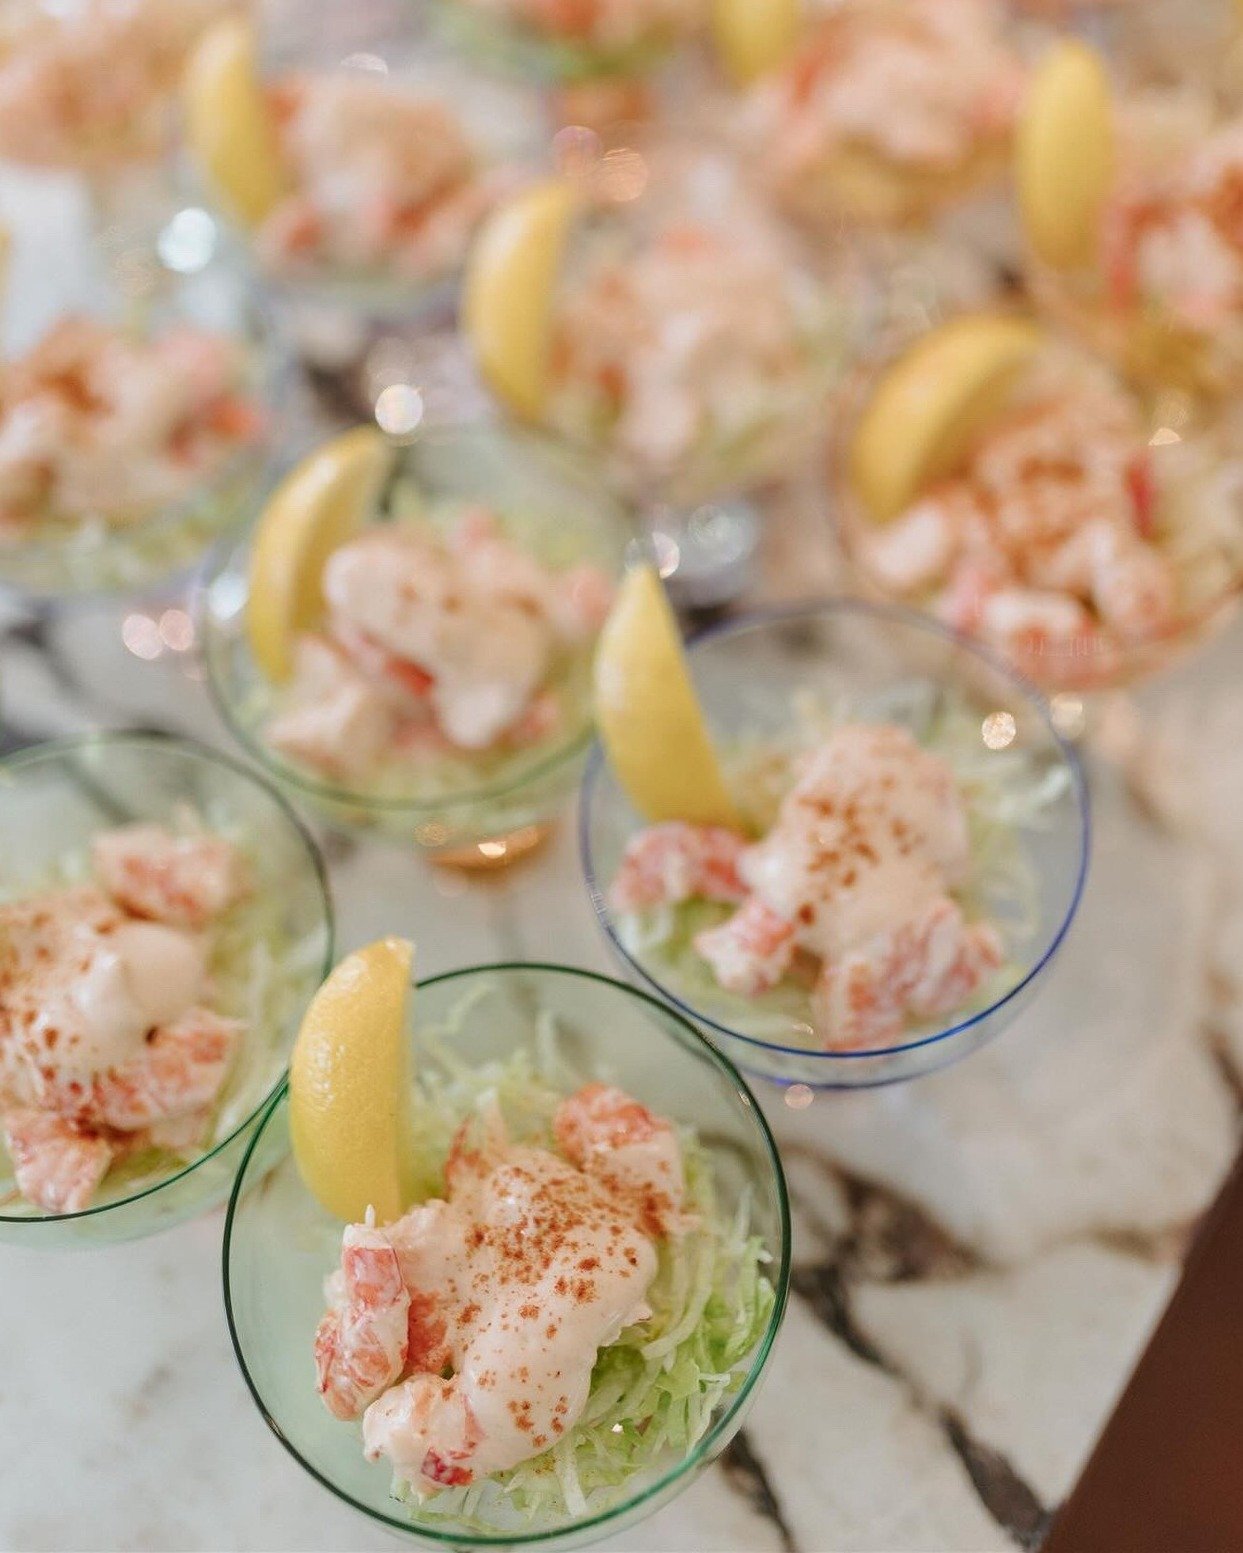 Re-imagining the classics in catering with these Prawn Cocktails as an entree option.

📷 @leileiclavey @belinda_thecuratedlife_ 

#prawncocktail #catering #caterer #eventcatering #eventcaterer